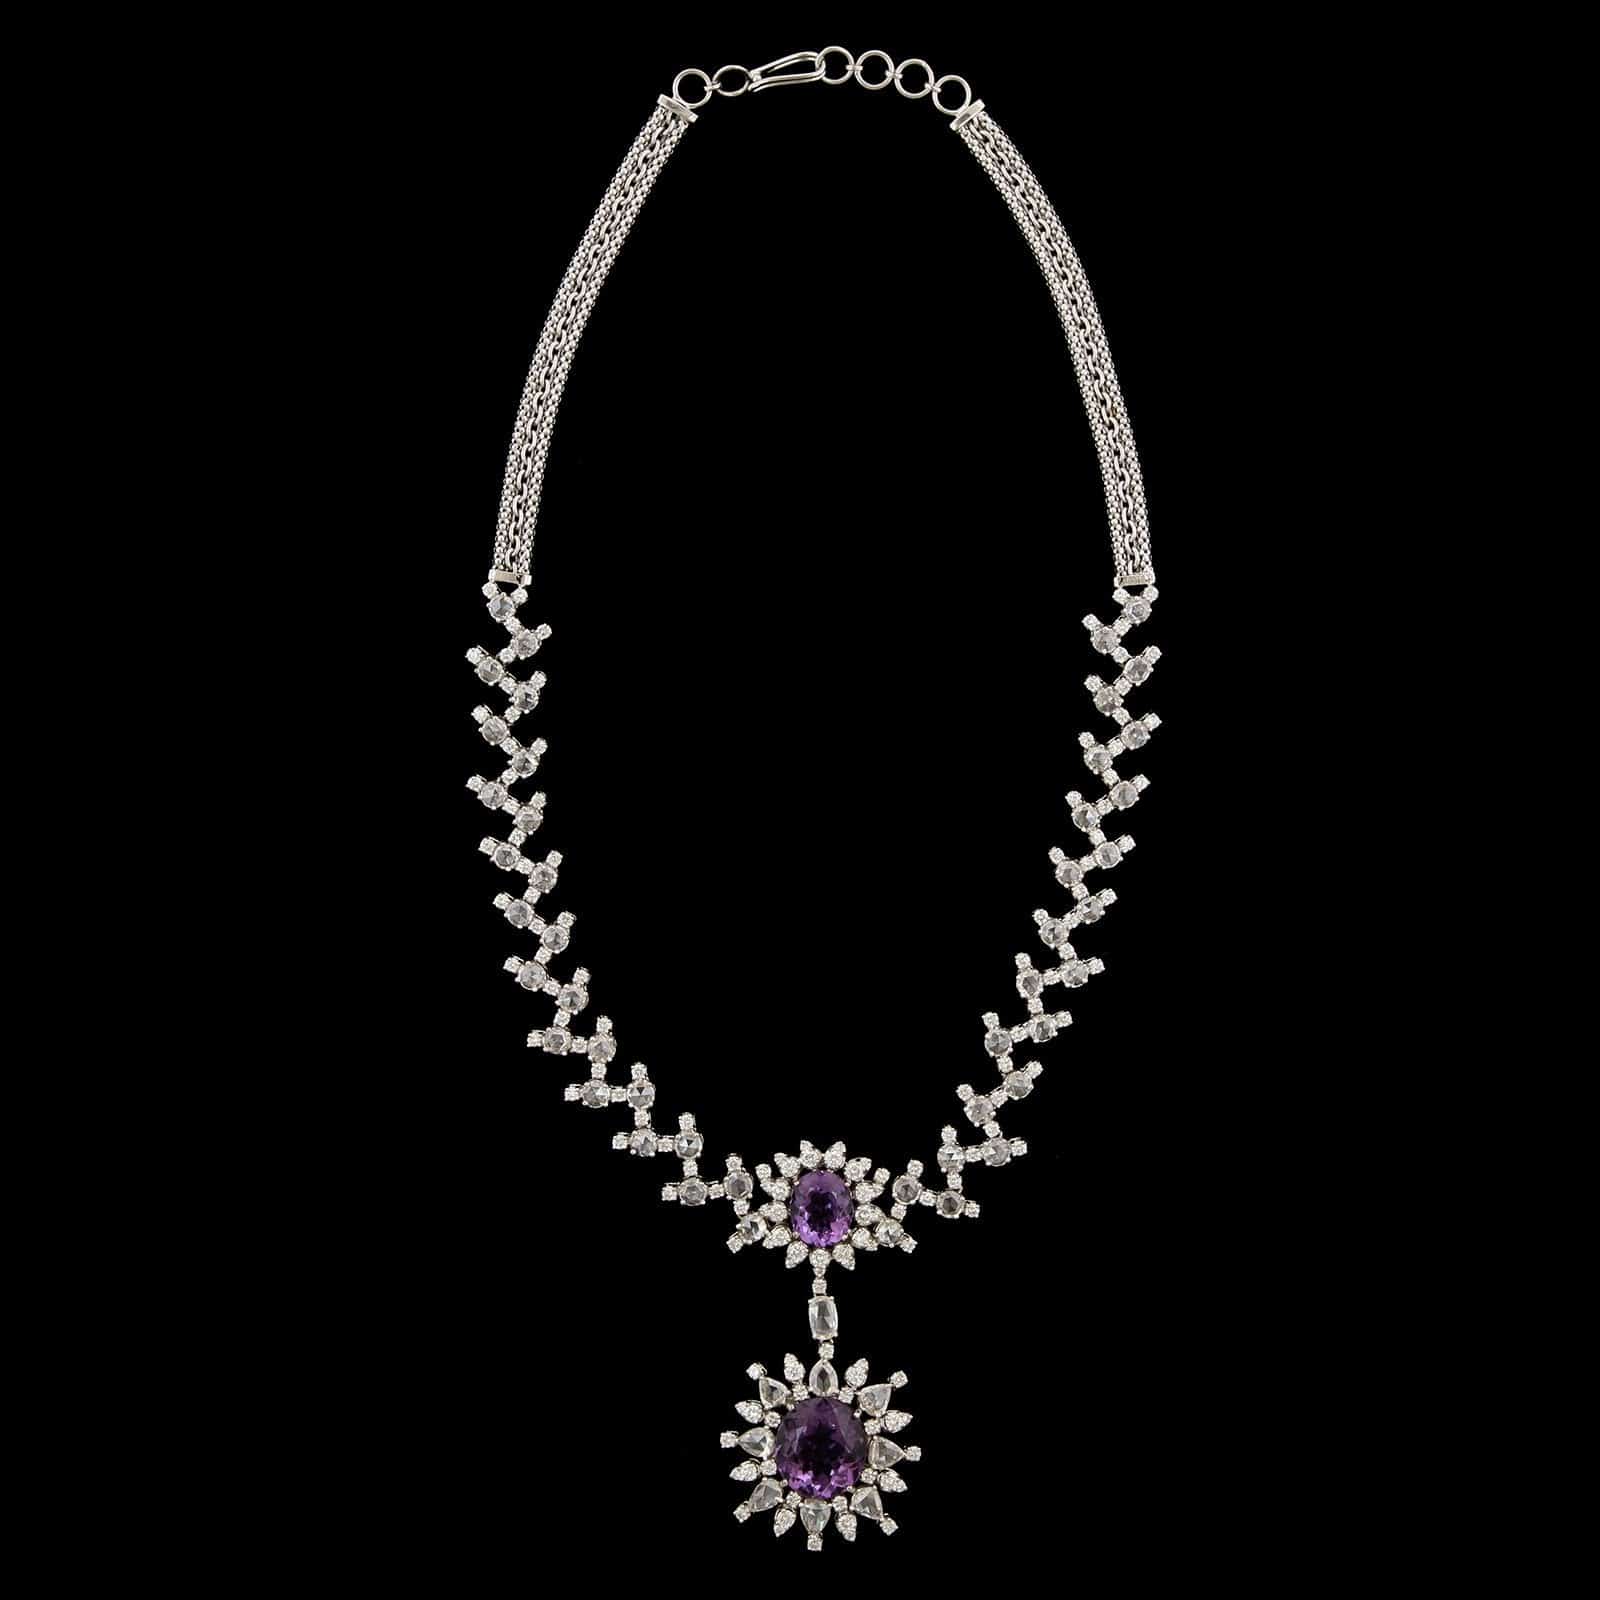 18K White Gold Amethyst and Diamond Necklace. 